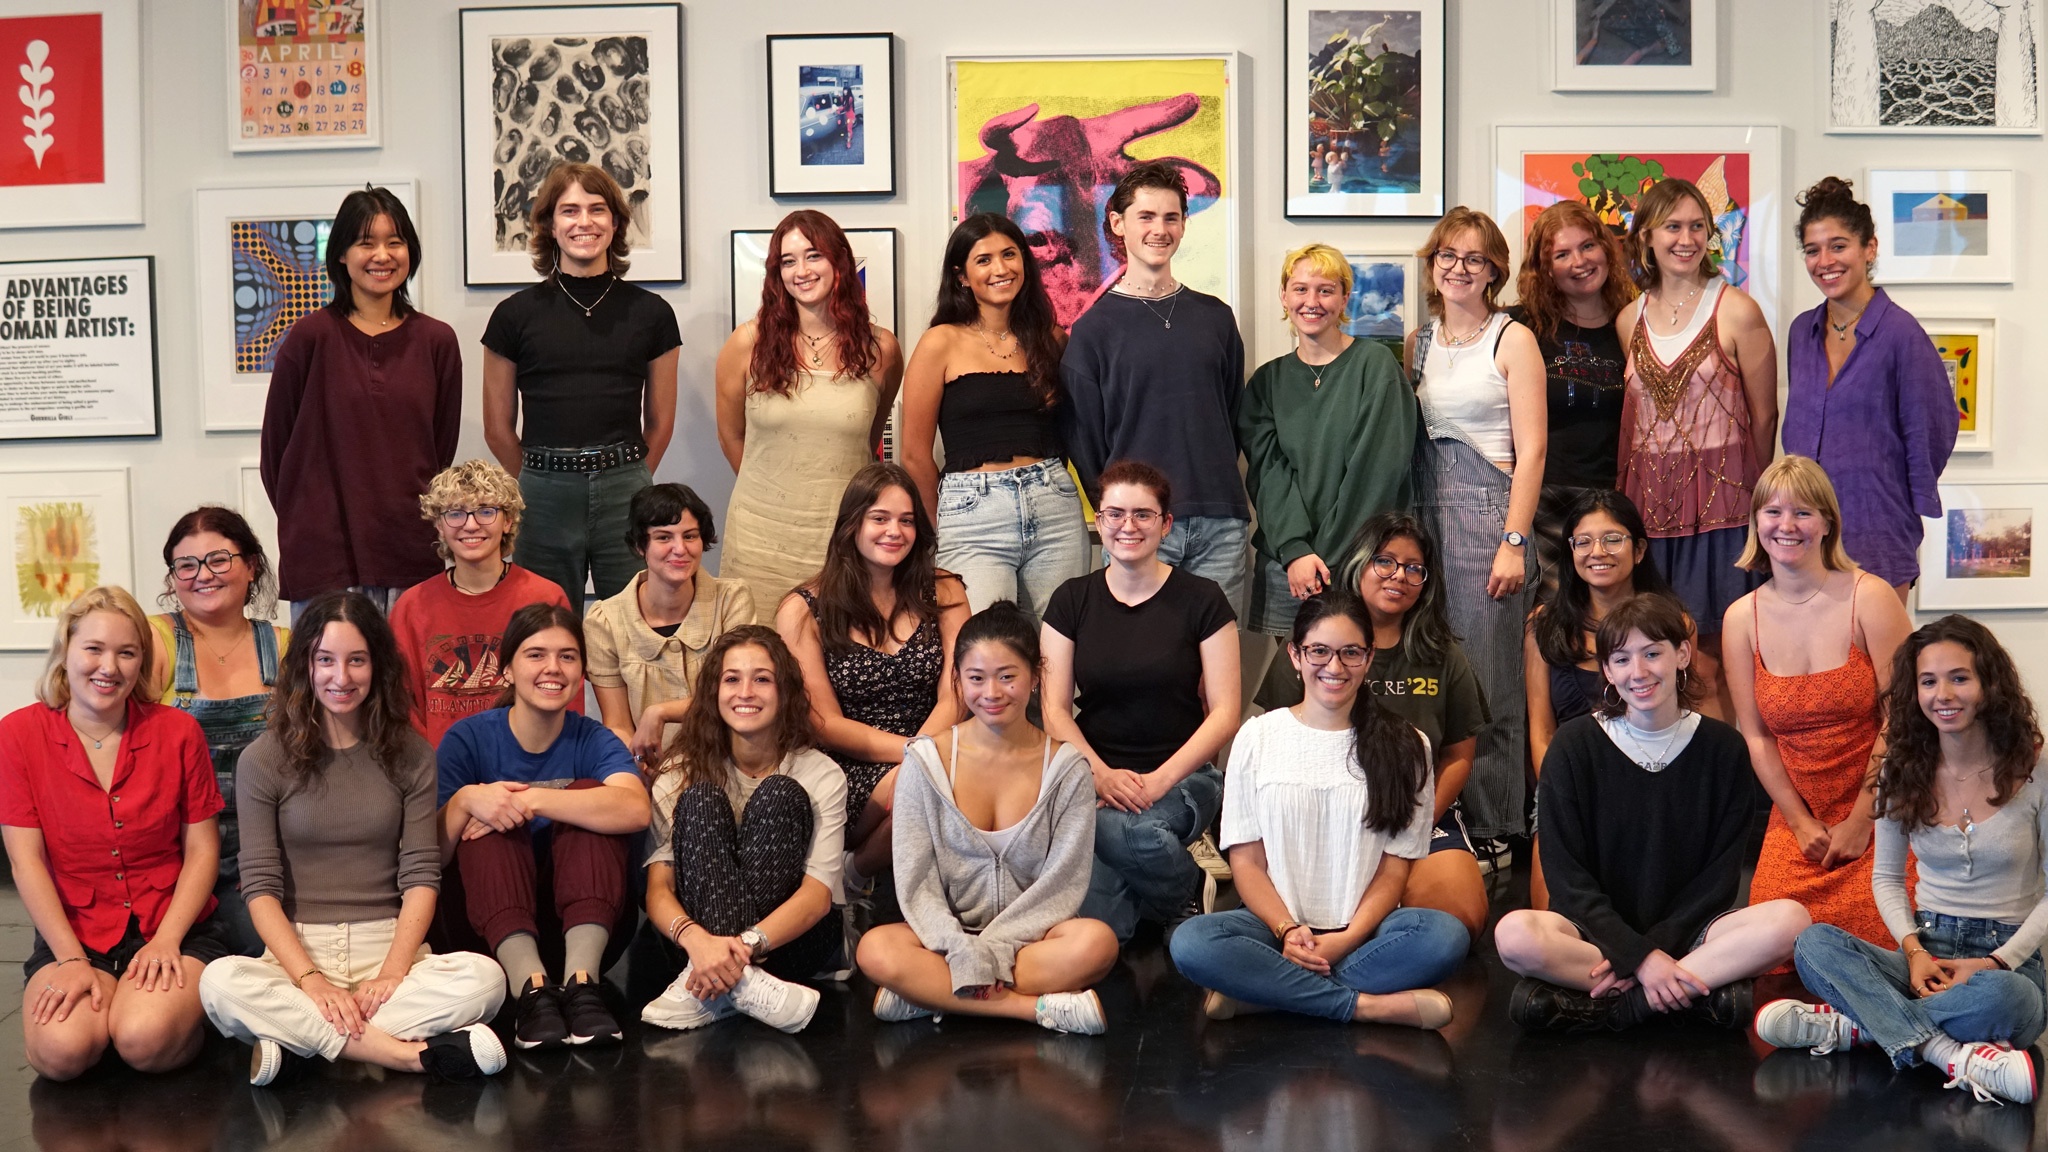 The Tang Student Advisory Council stand and sit against a backdrop of art in the Frances Young Tang Teaching Museum and Art Gallery.